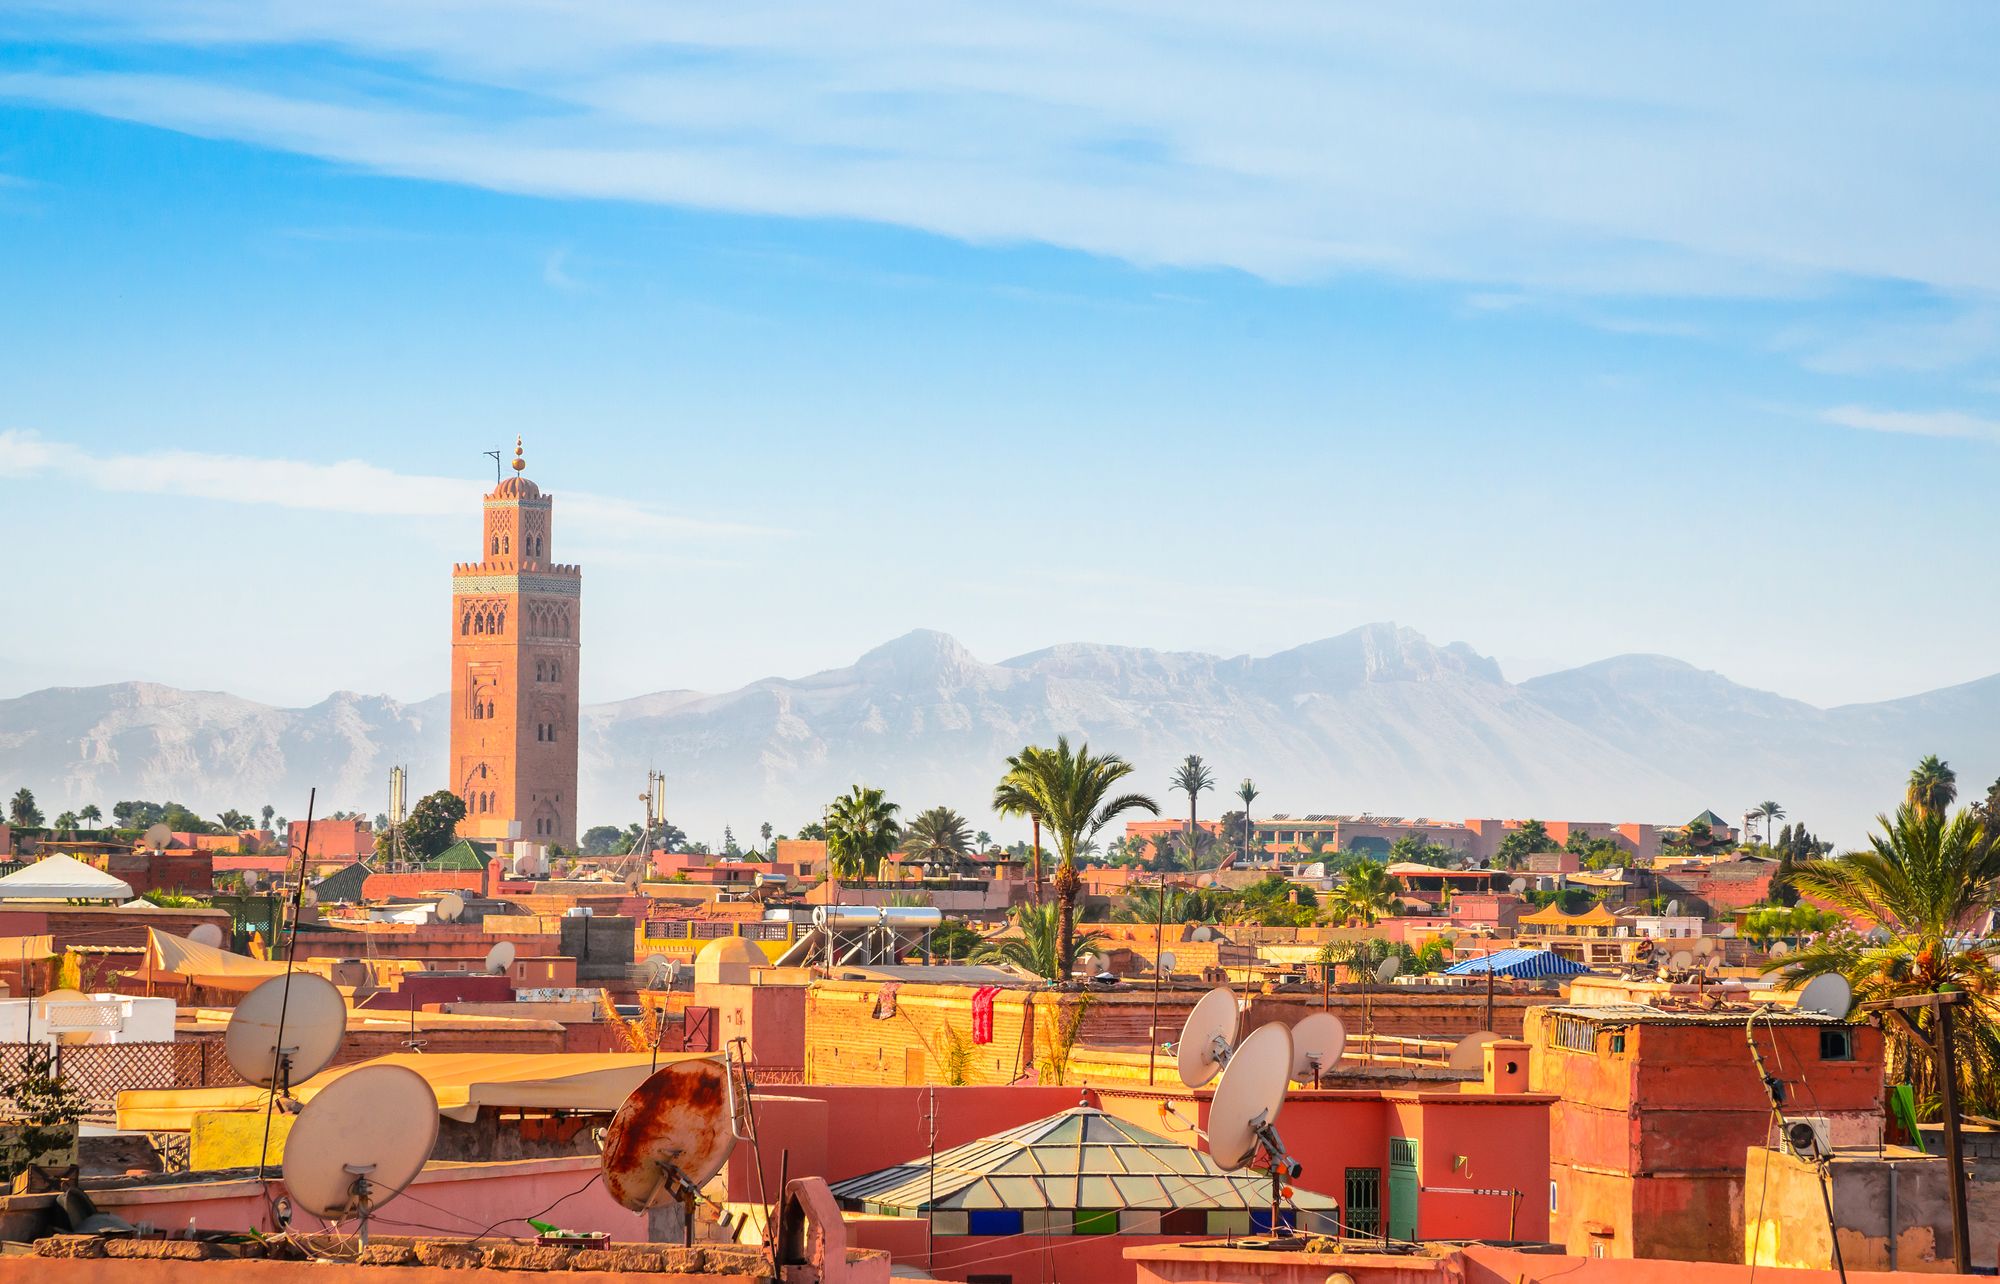 Panoramic view of Marrakech with the Atlas Mountains in the background